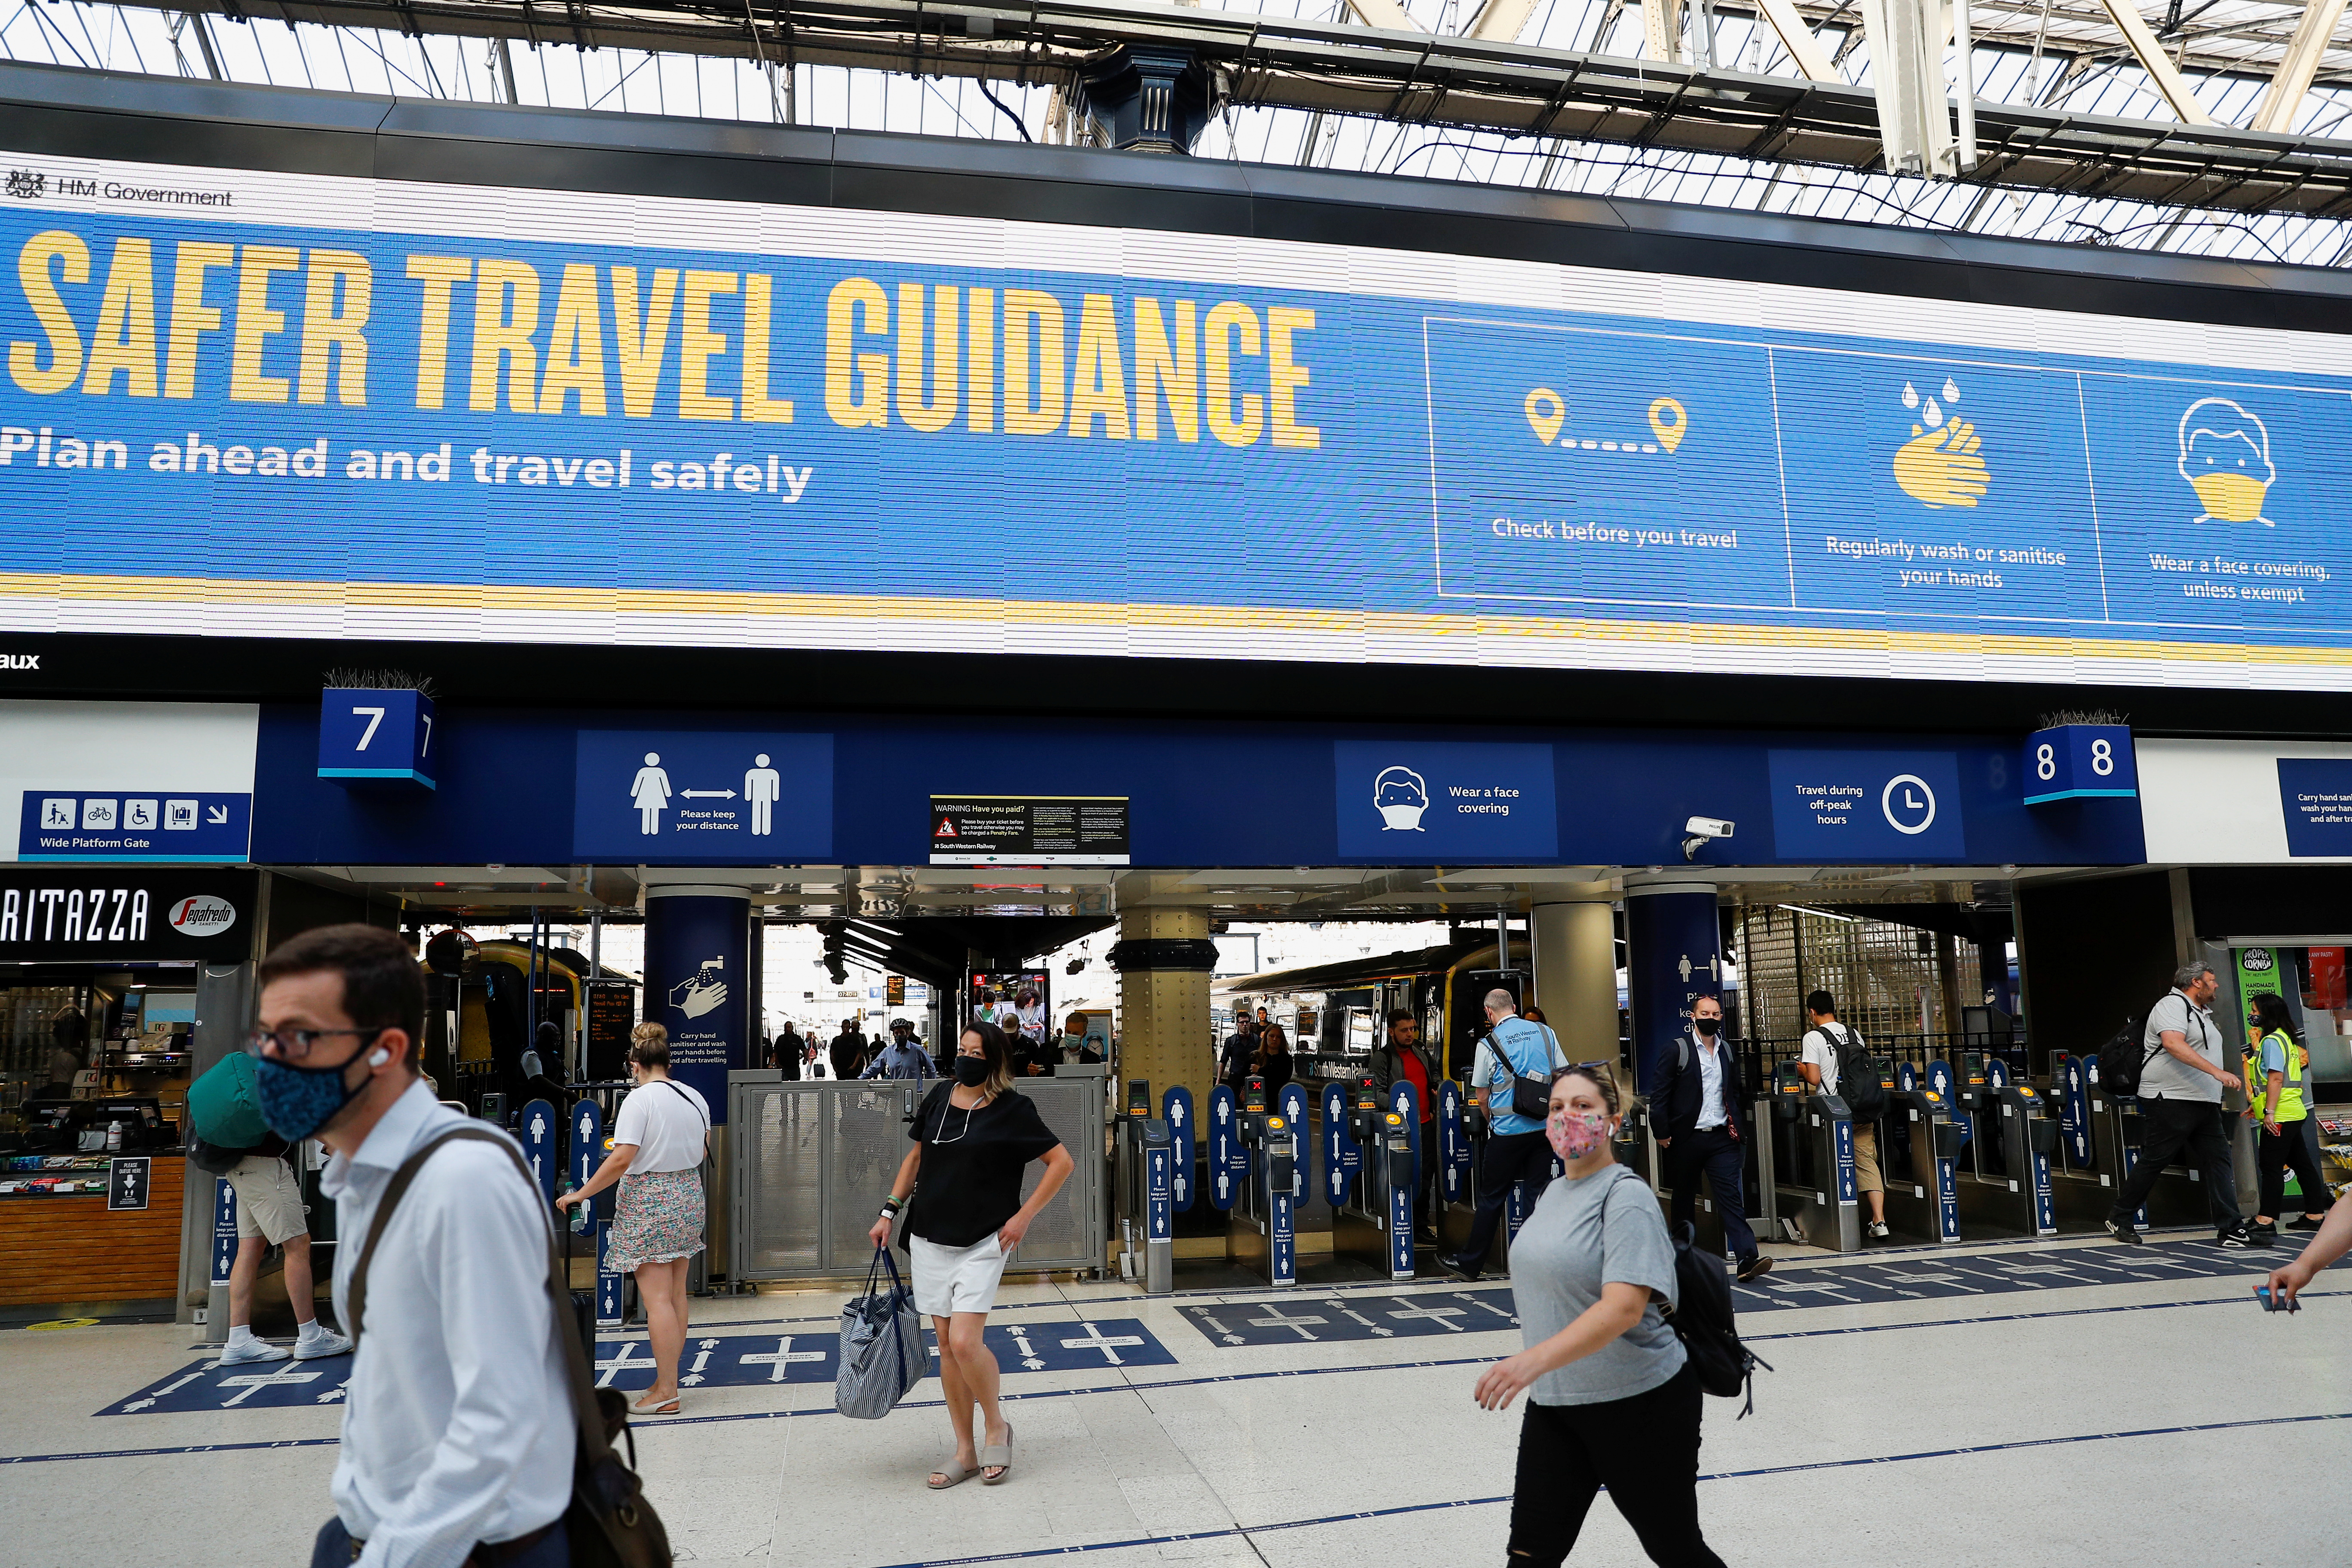 Commuters walk past a travel guidance sign, in London